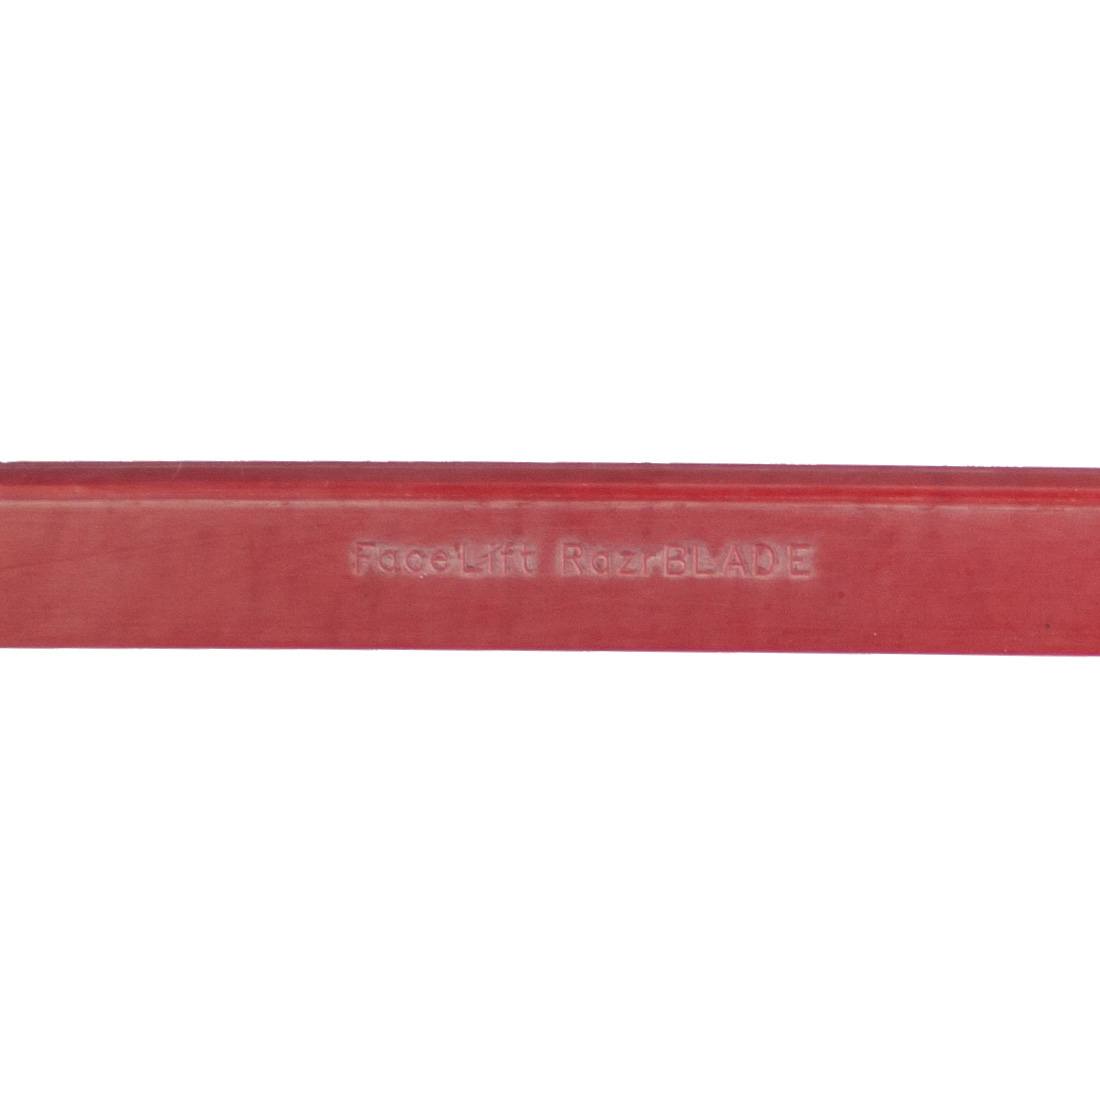 Facelift RazrBlade Red Squeegee Rubber Close Up View